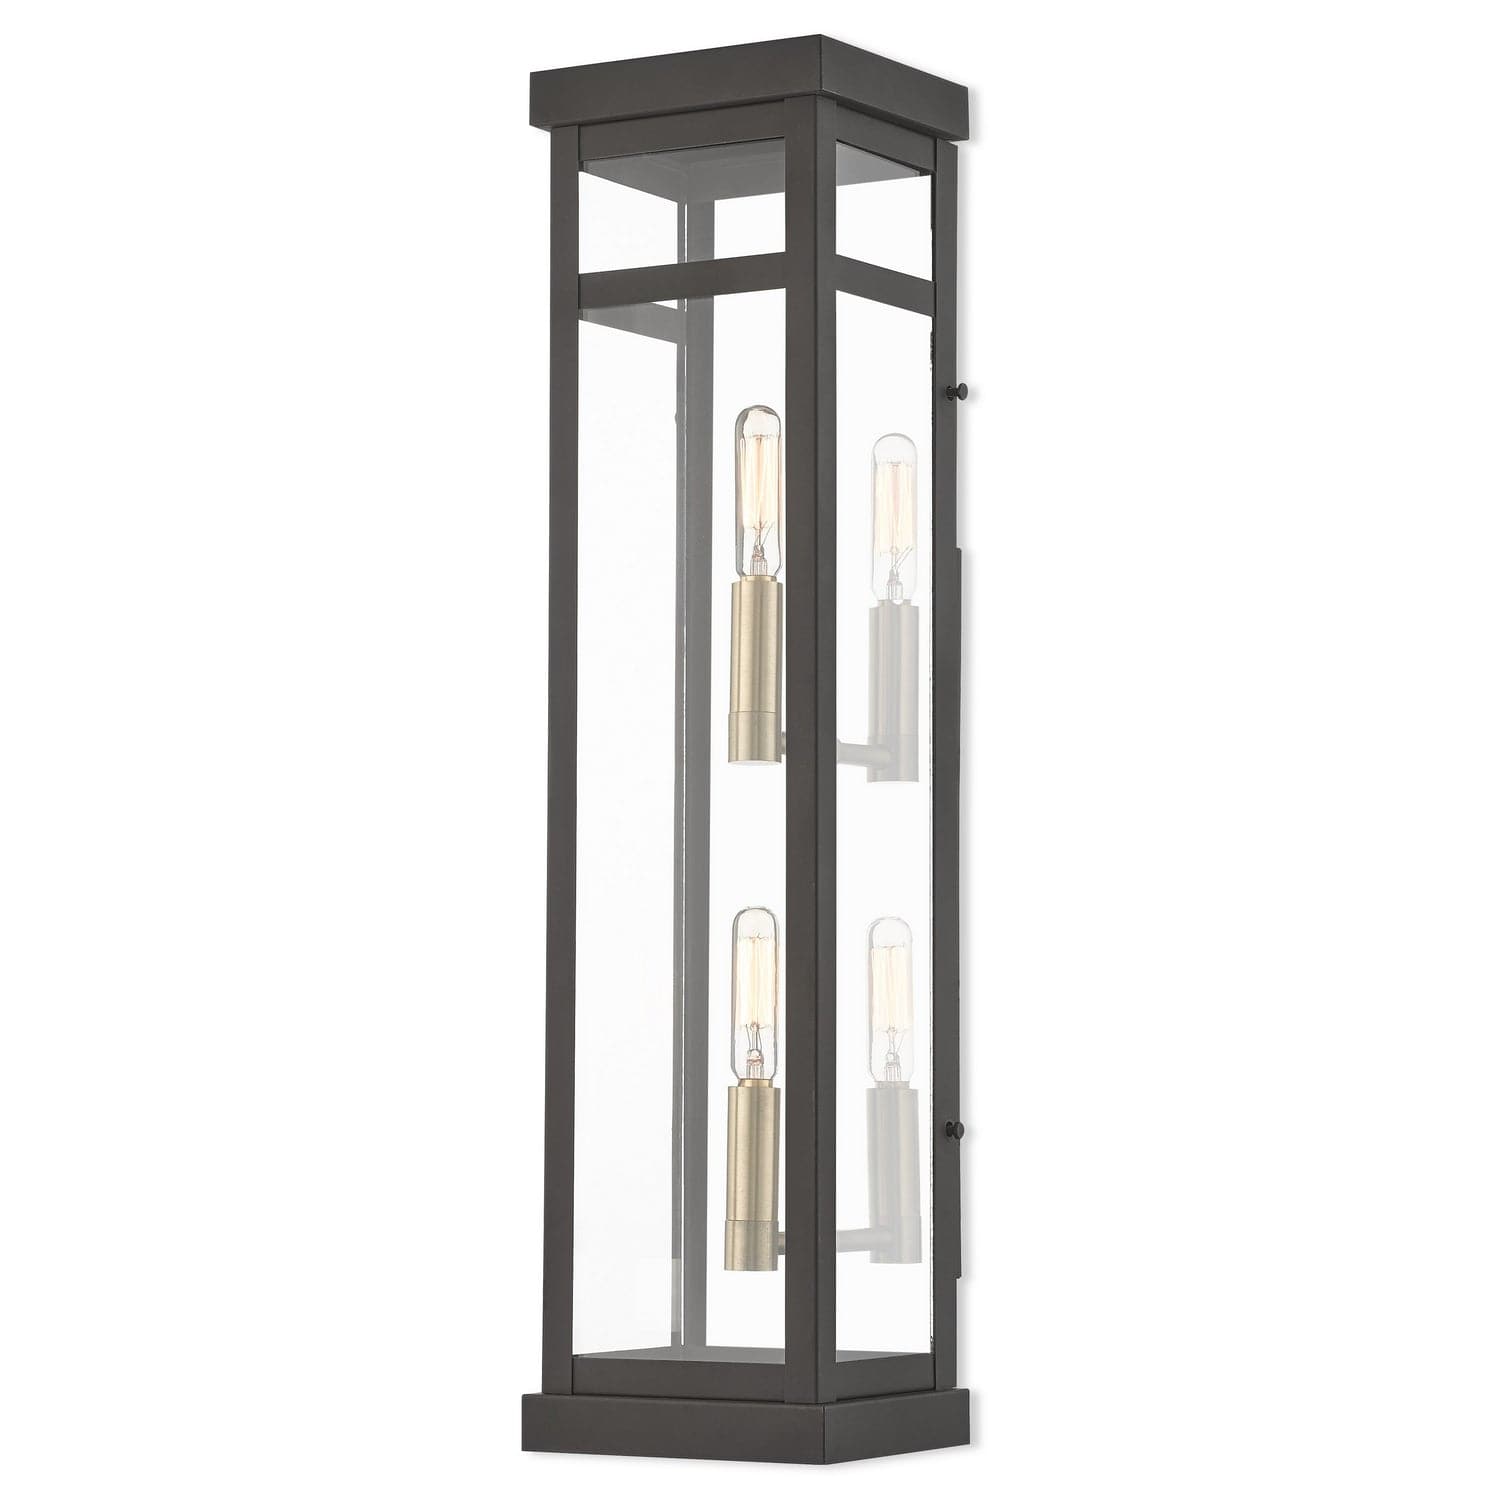 Livex Lighting - 20706-07 - Two Light Outdoor Wall Lantern - Hopewell - Bronze w/ Antique Brass Cluster and Polished Chrome Stainless Steel